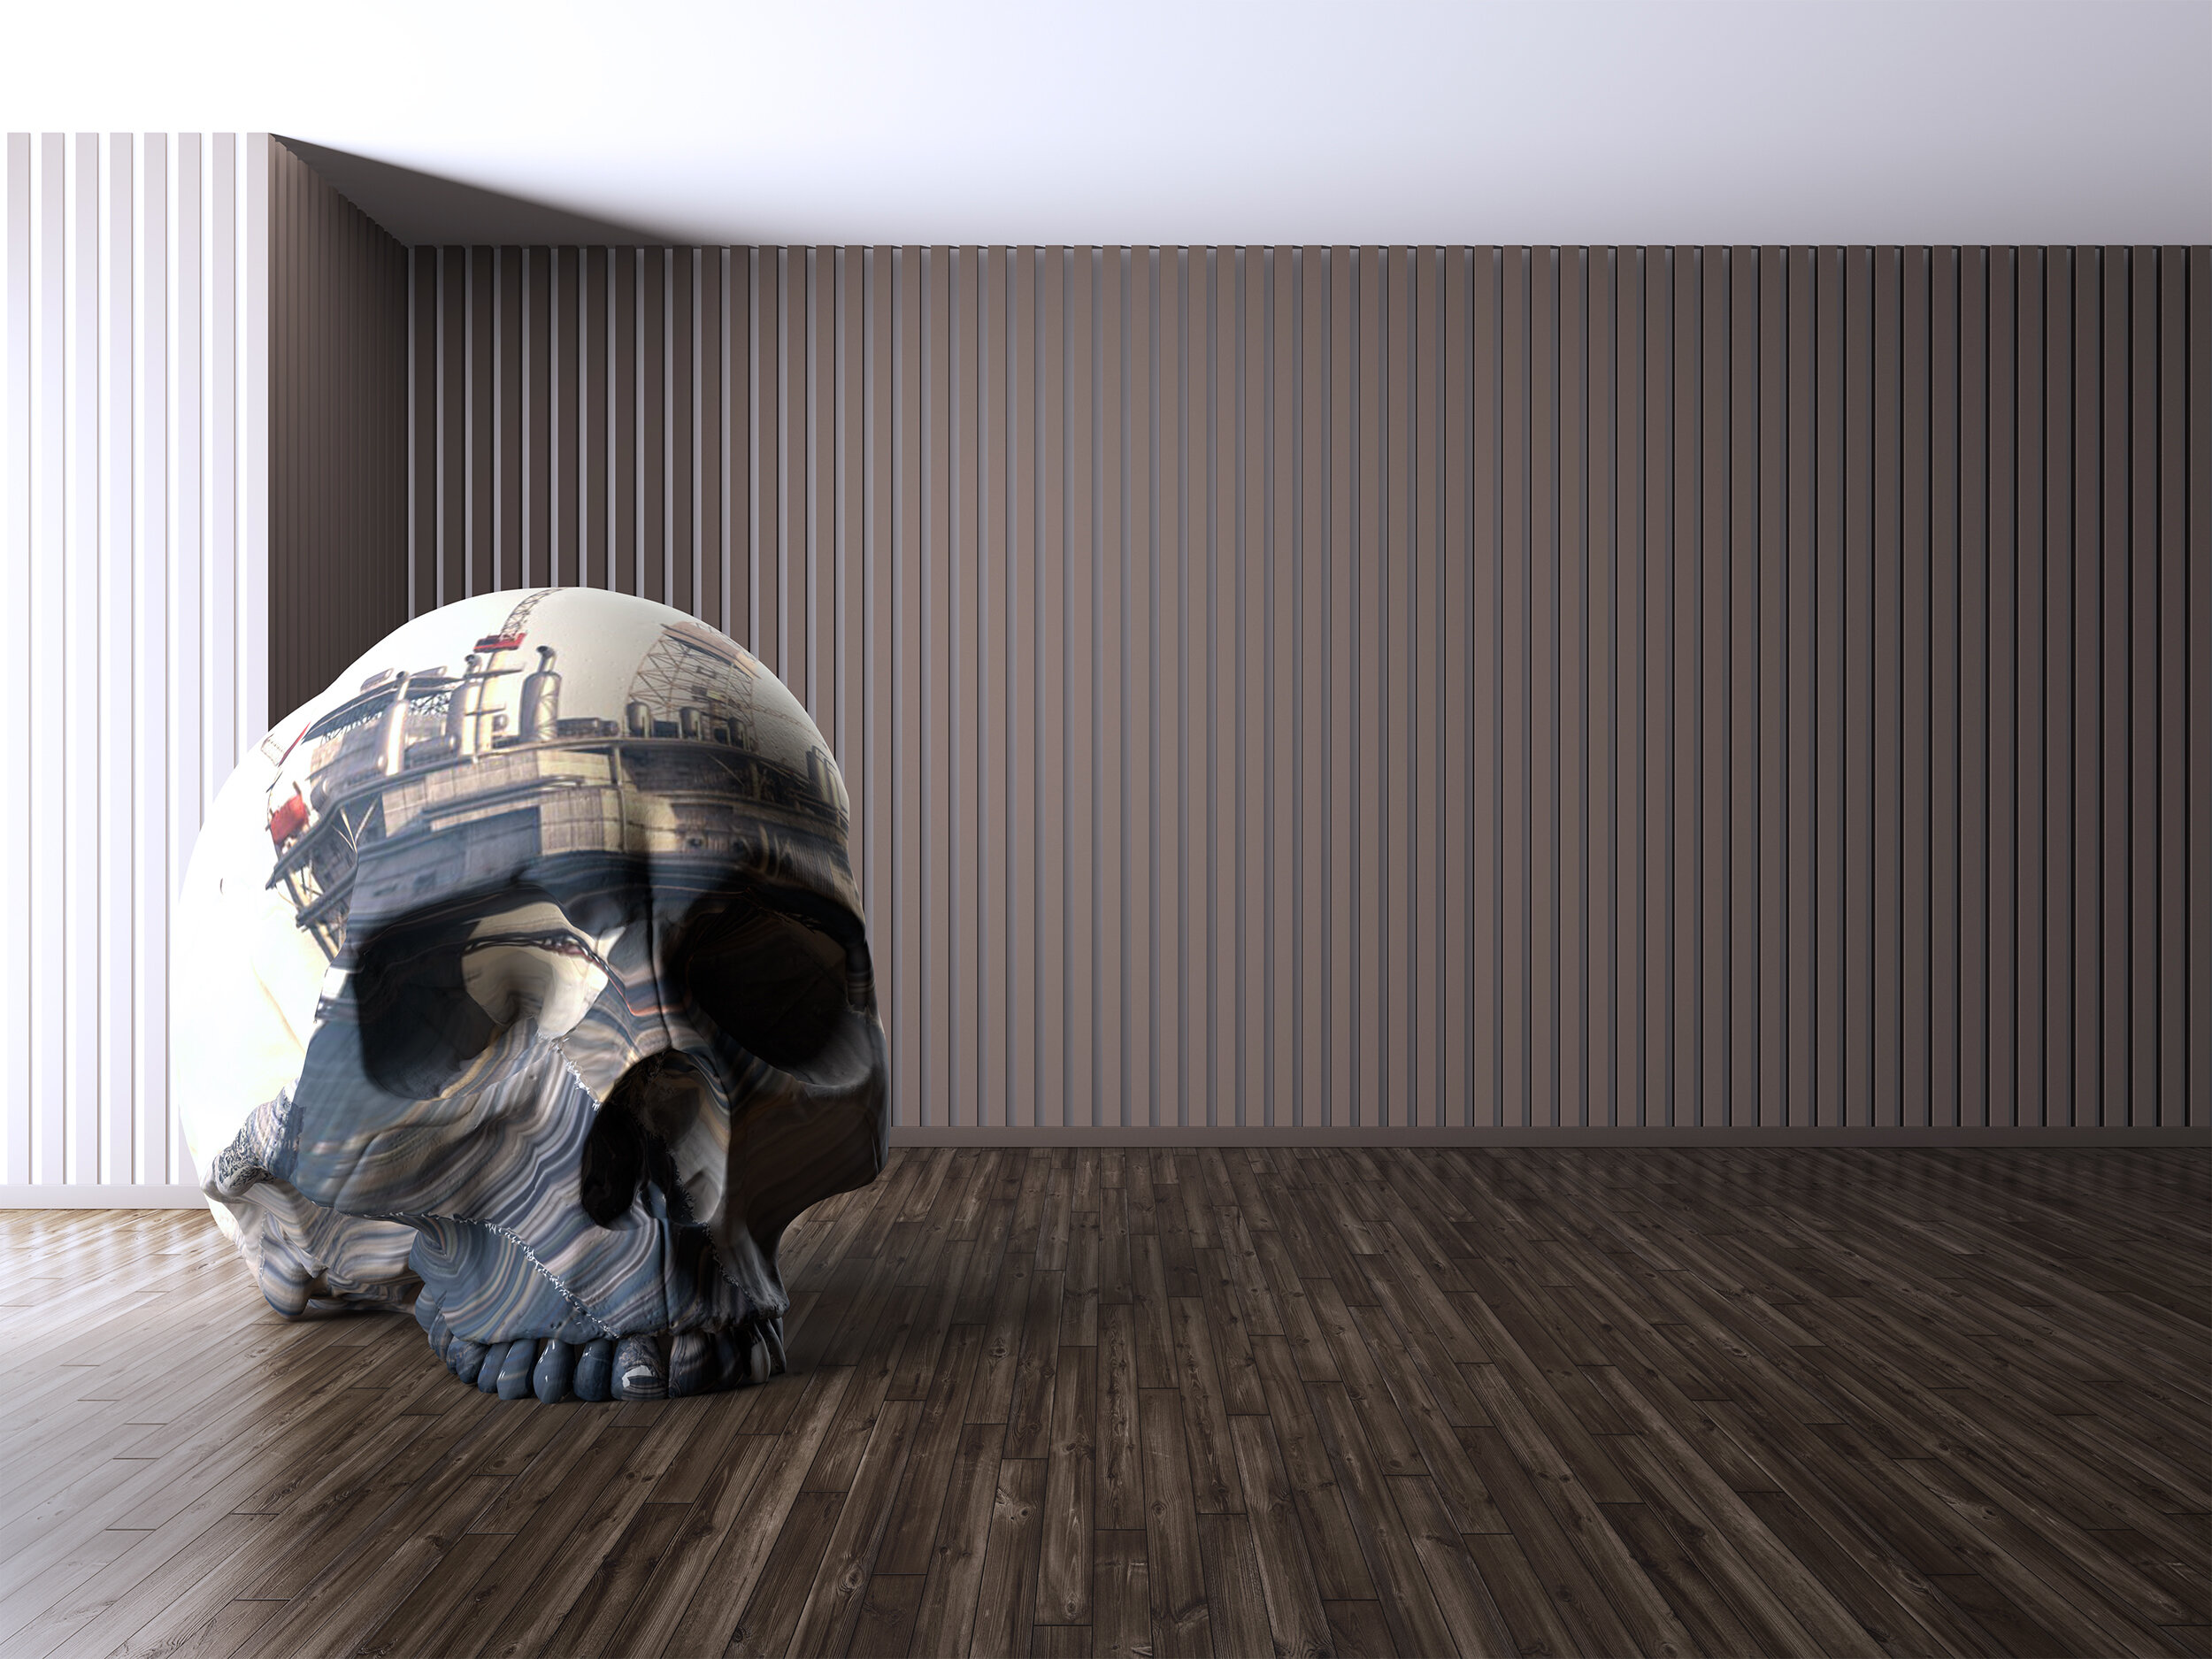 Oil Head V [Projection Mapping Concept]